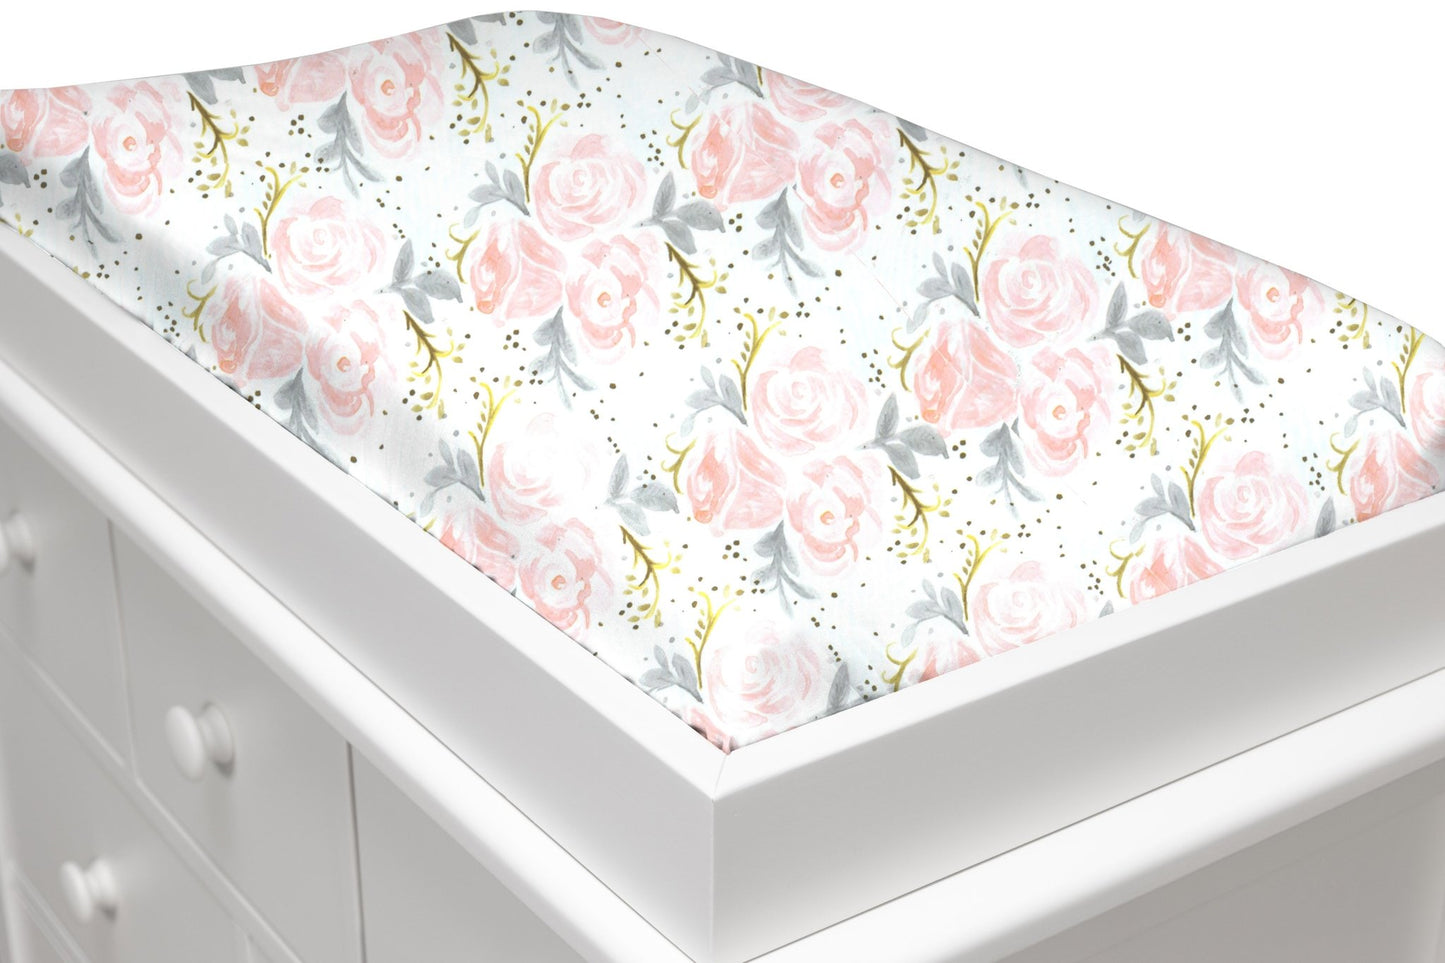 Briar Rose Changing Pad Cover - New Arrivals Inc